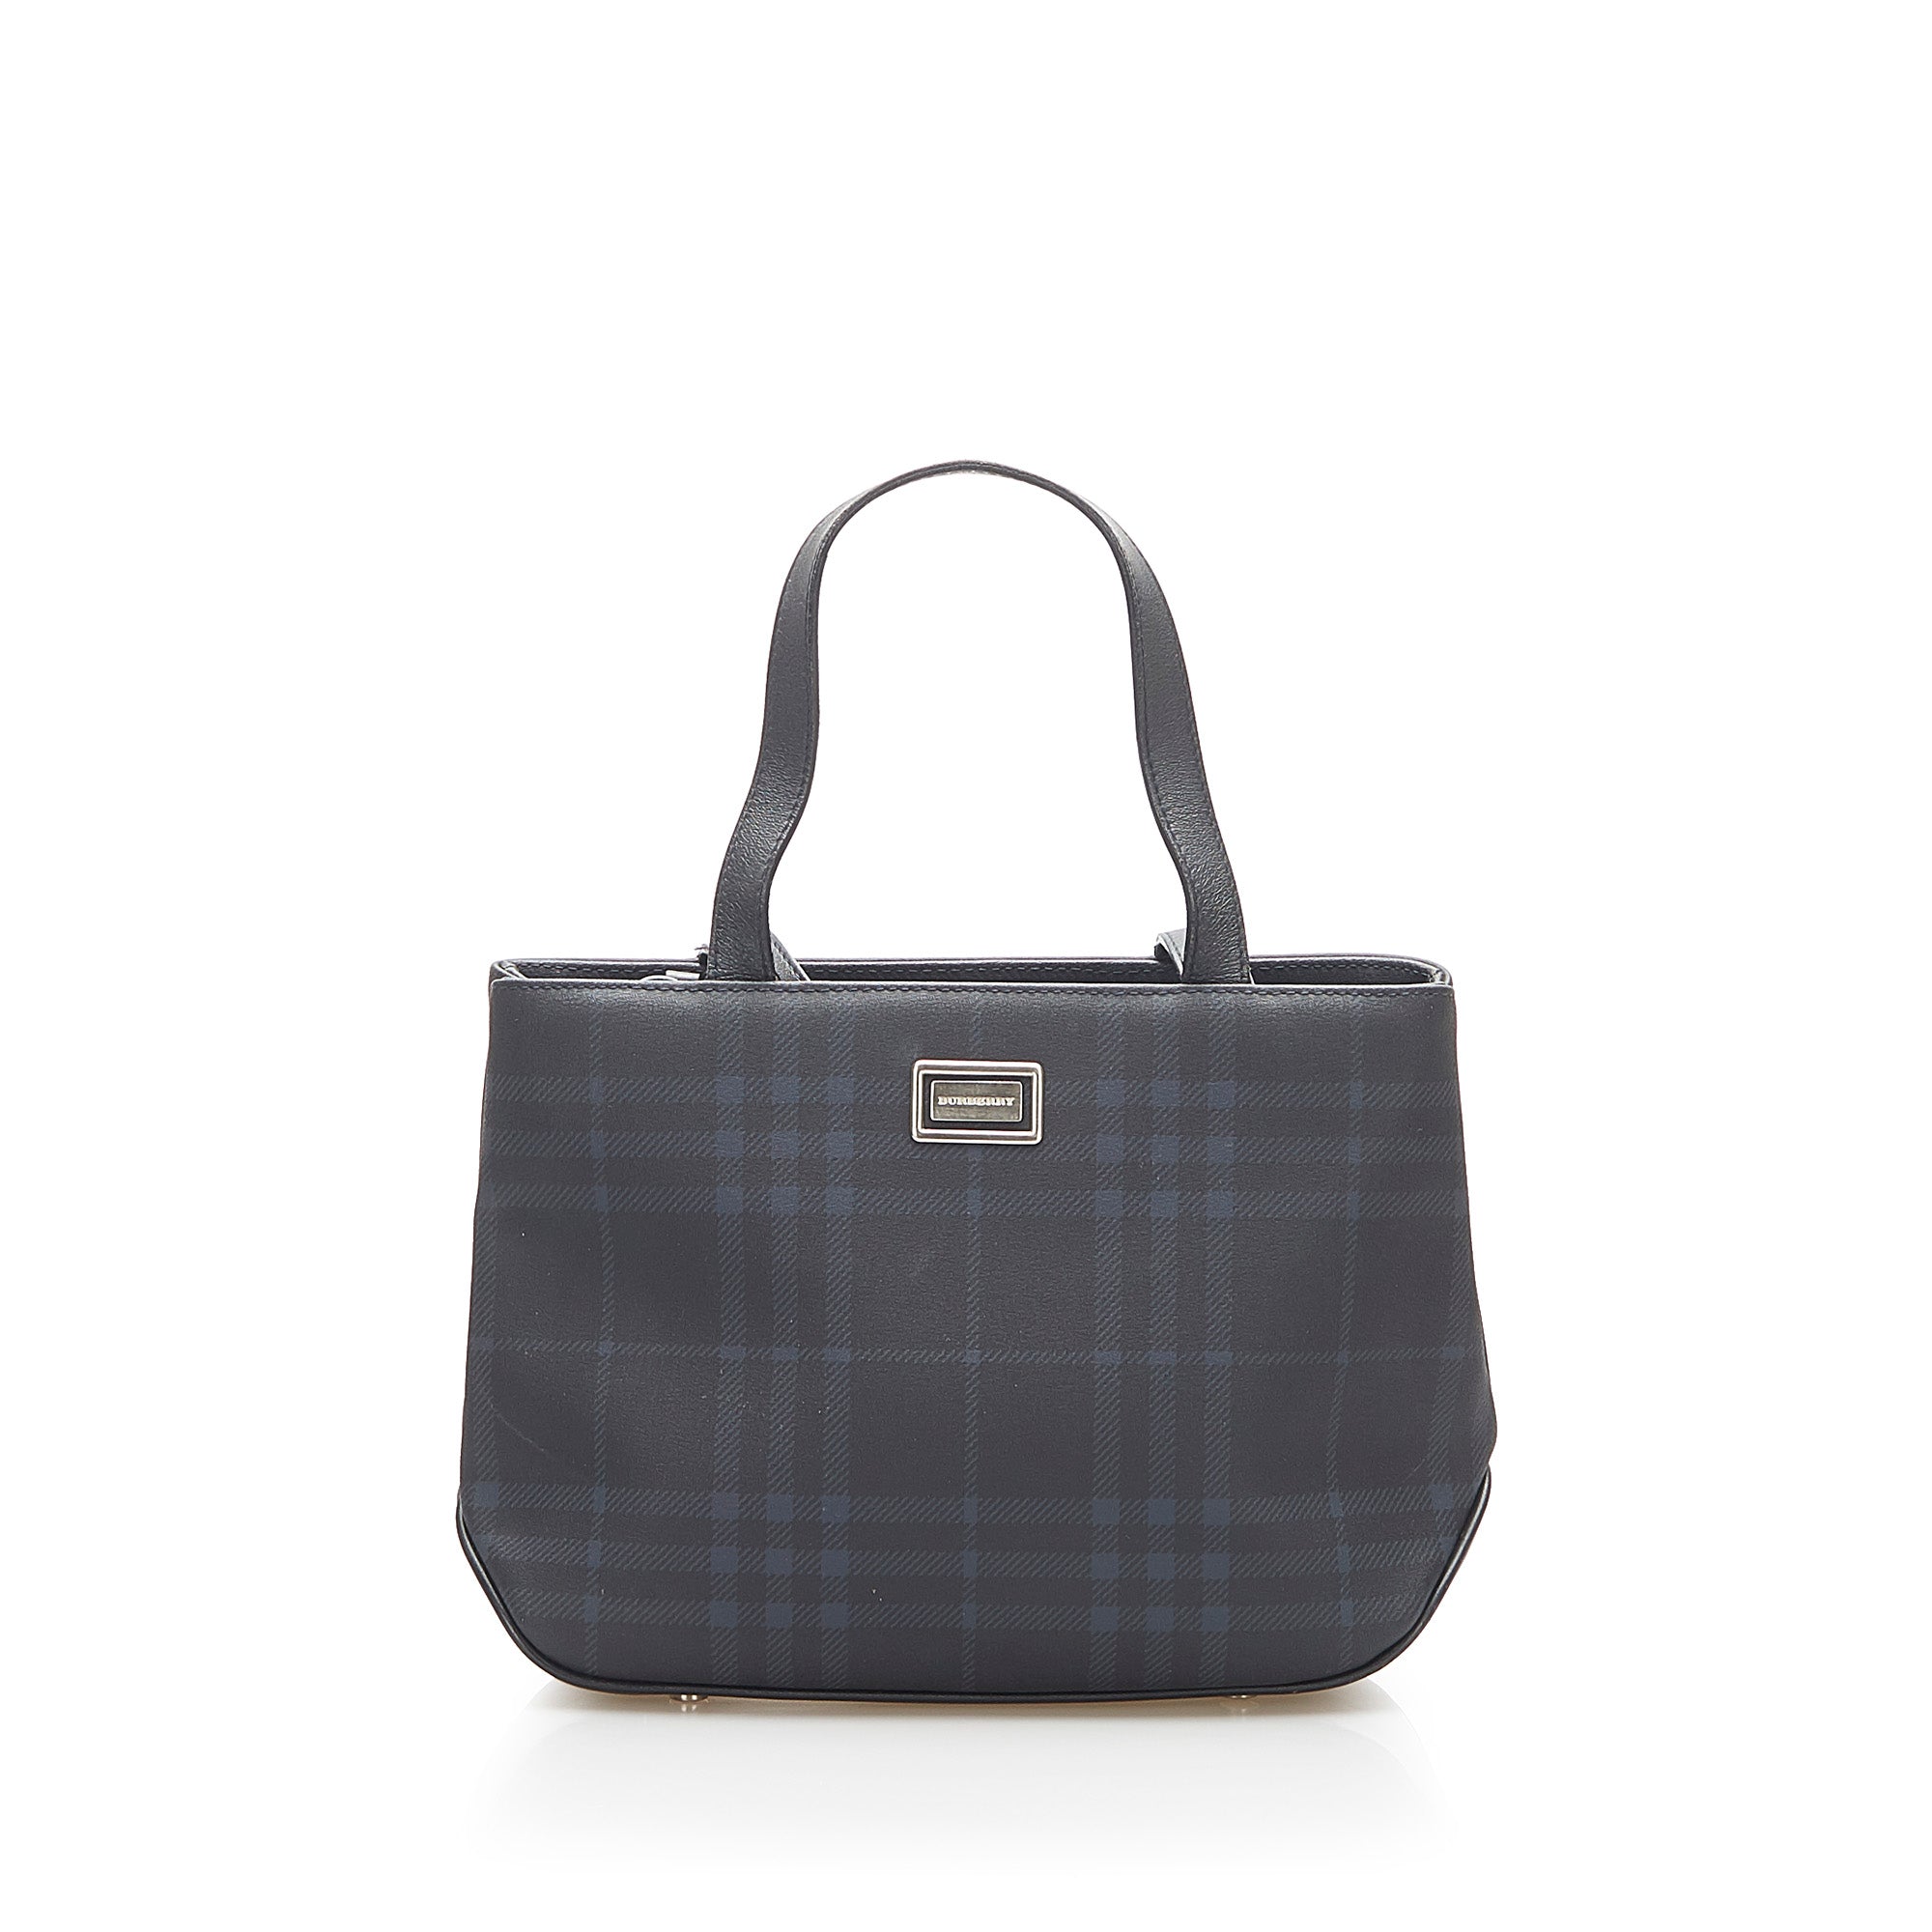 Burberry, Bags, Burberry Checked Tote Black And White